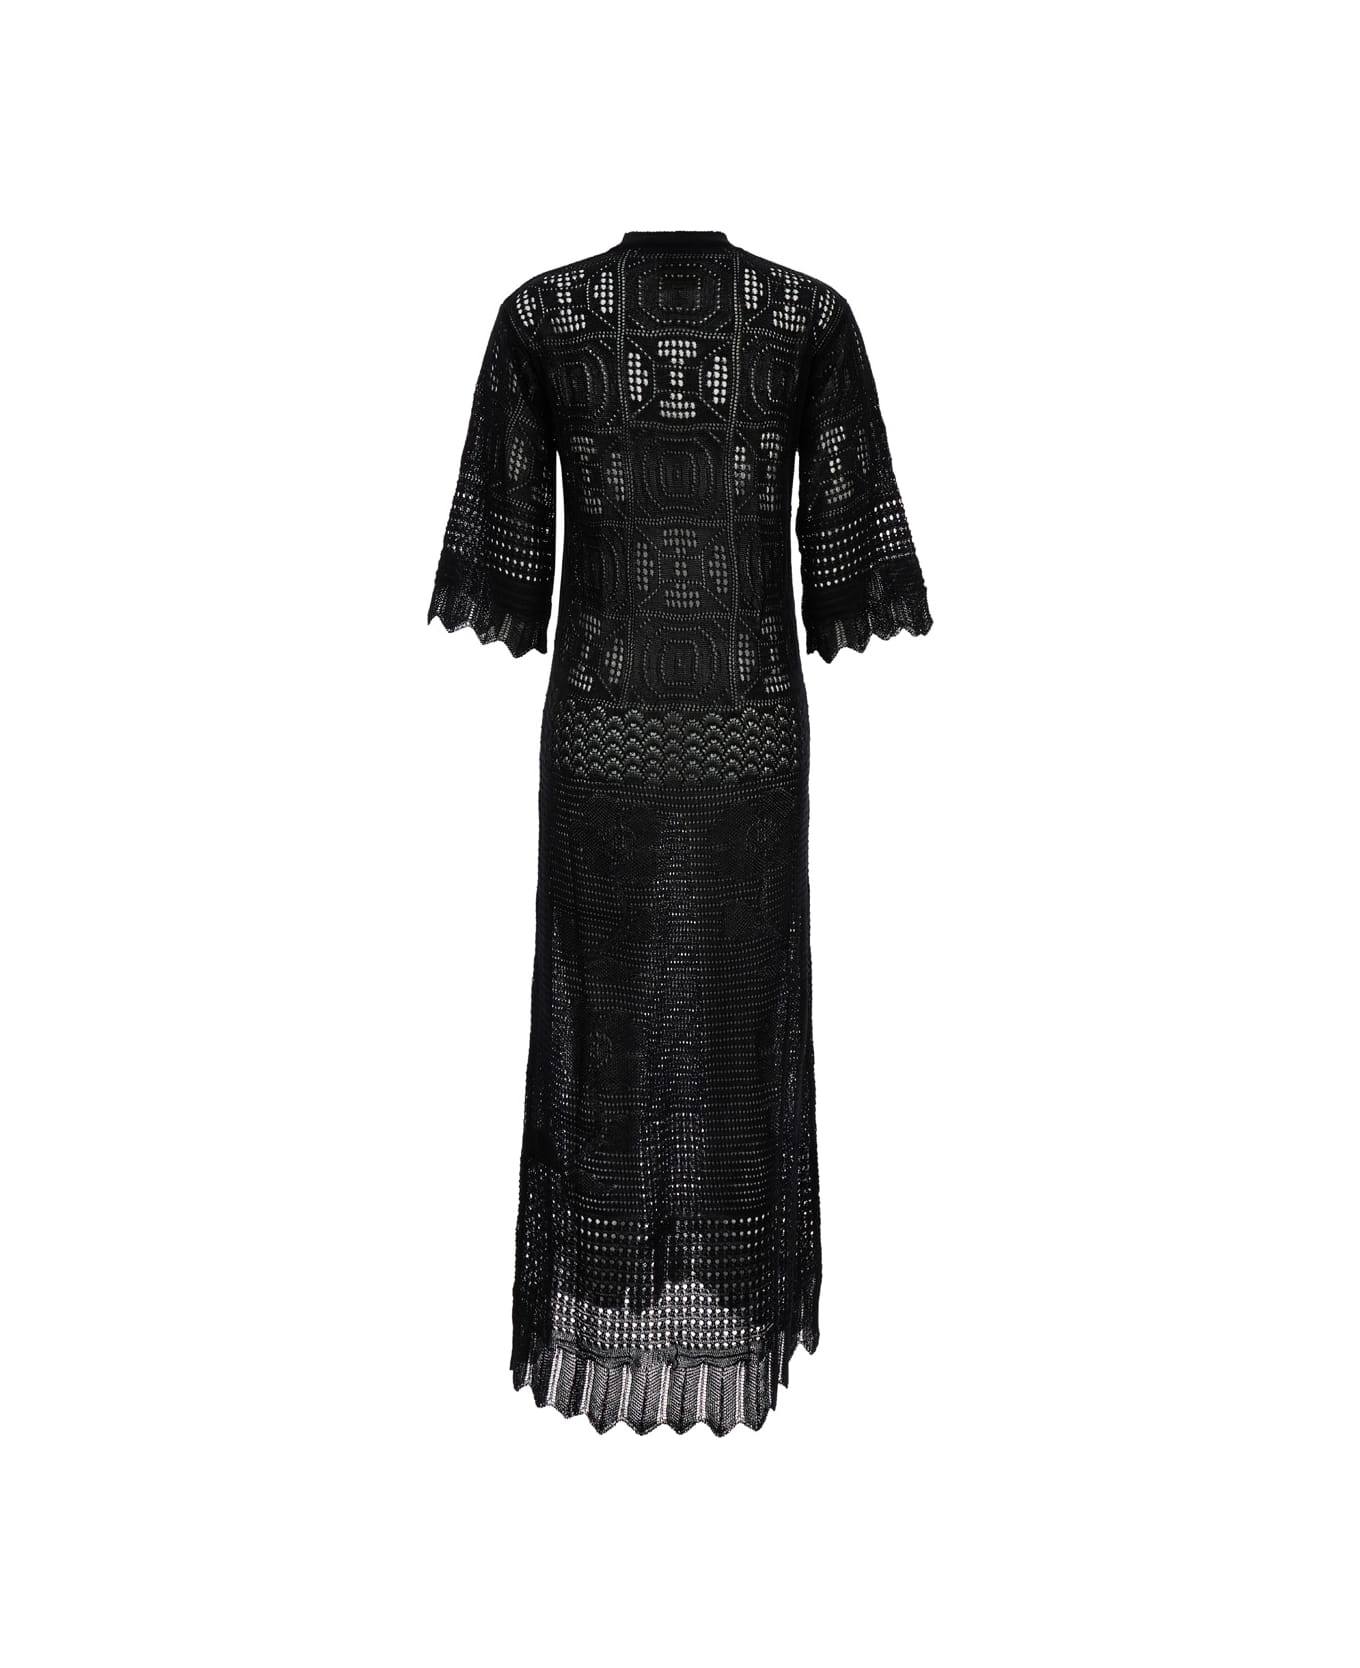 SEMICOUTURE Long Black Dress With Lace-up Closure In Cotton Lace Woman - Black